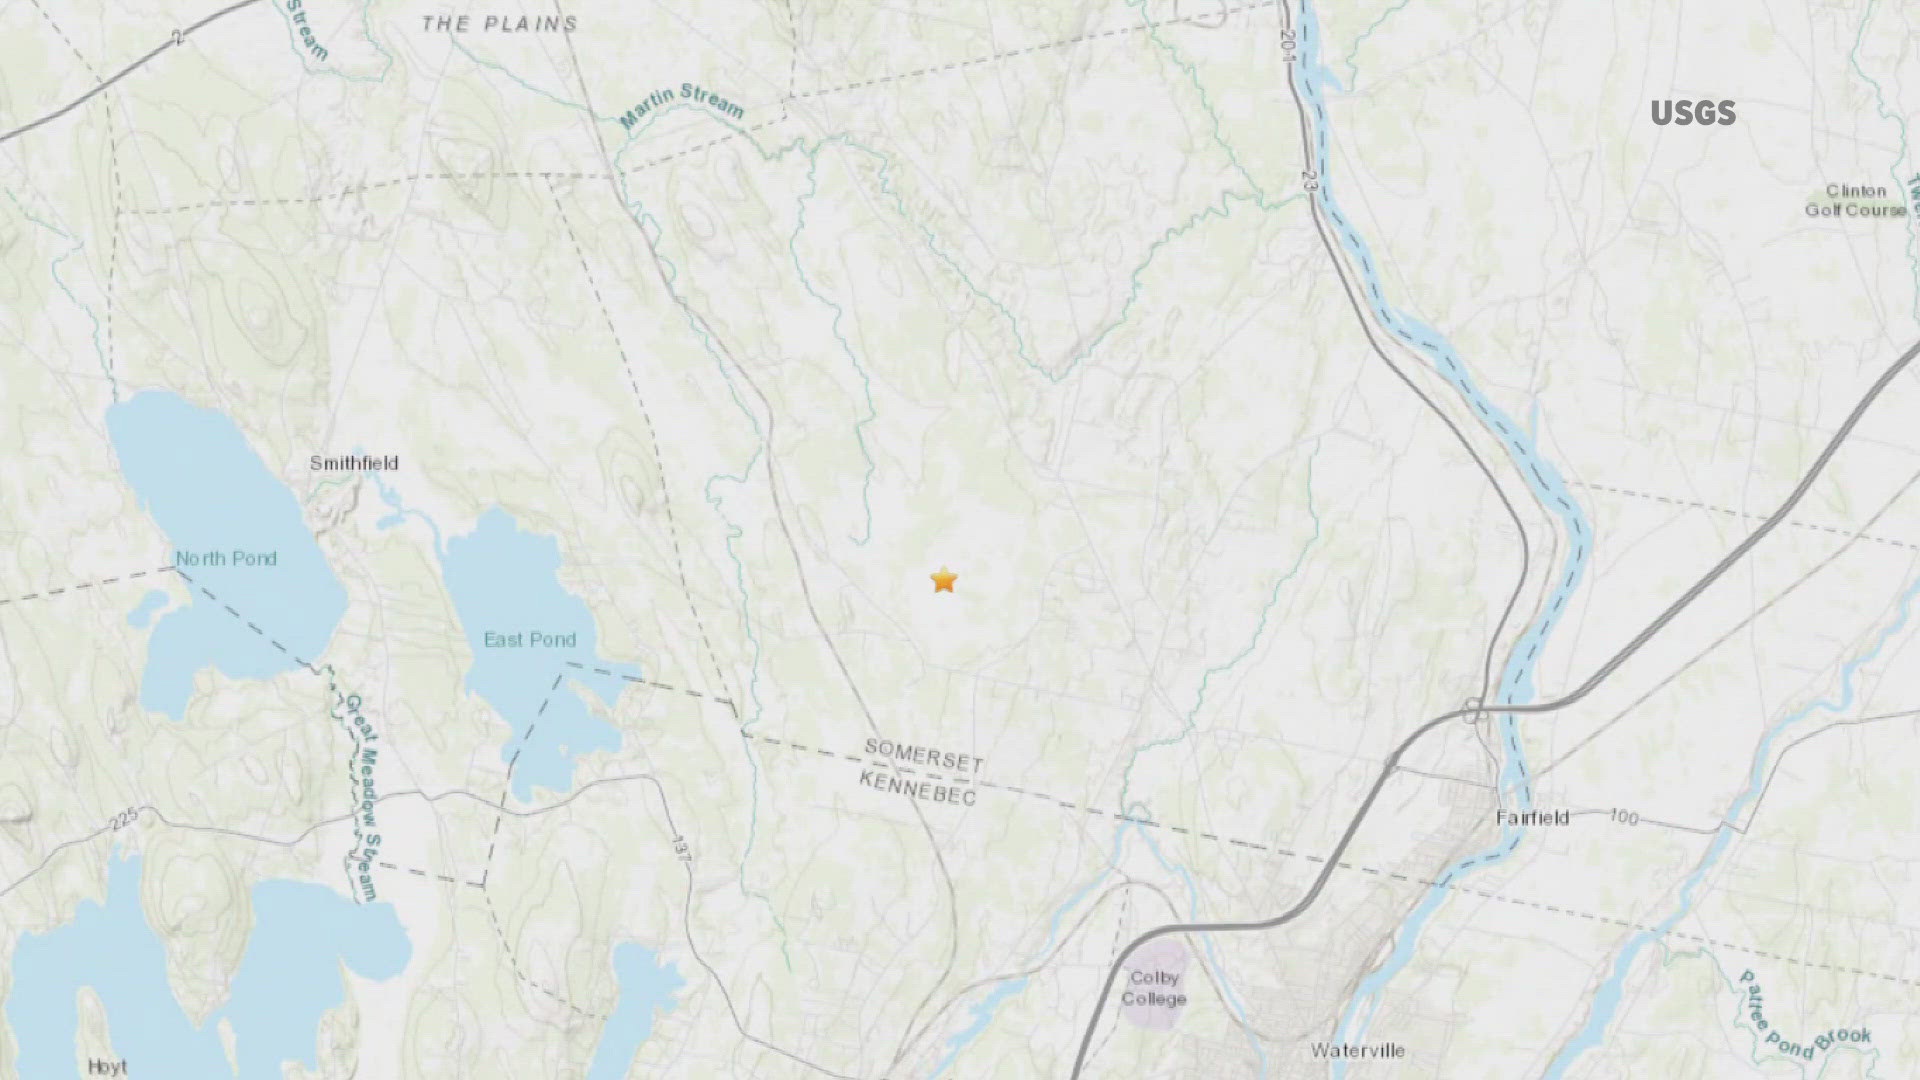 The USGS says the earthquake was 1.8 magnitude with a depth of eight kilometers.